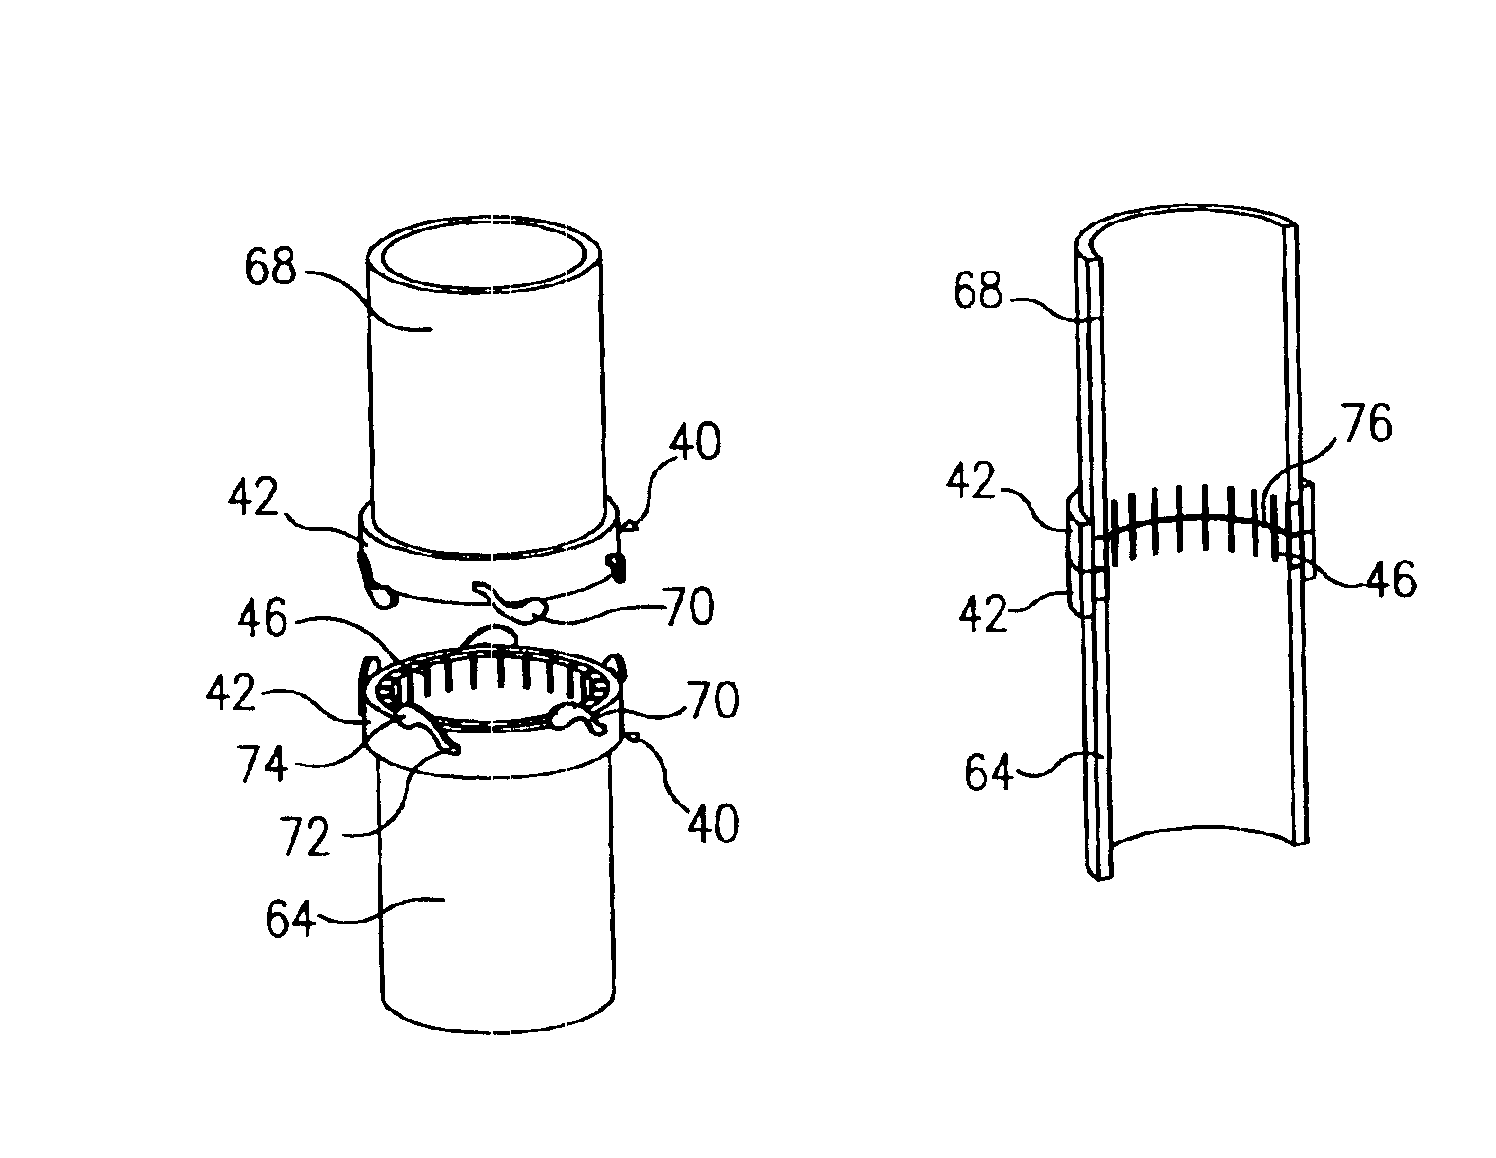 Connectors for hollow anatomical structures and methods of use